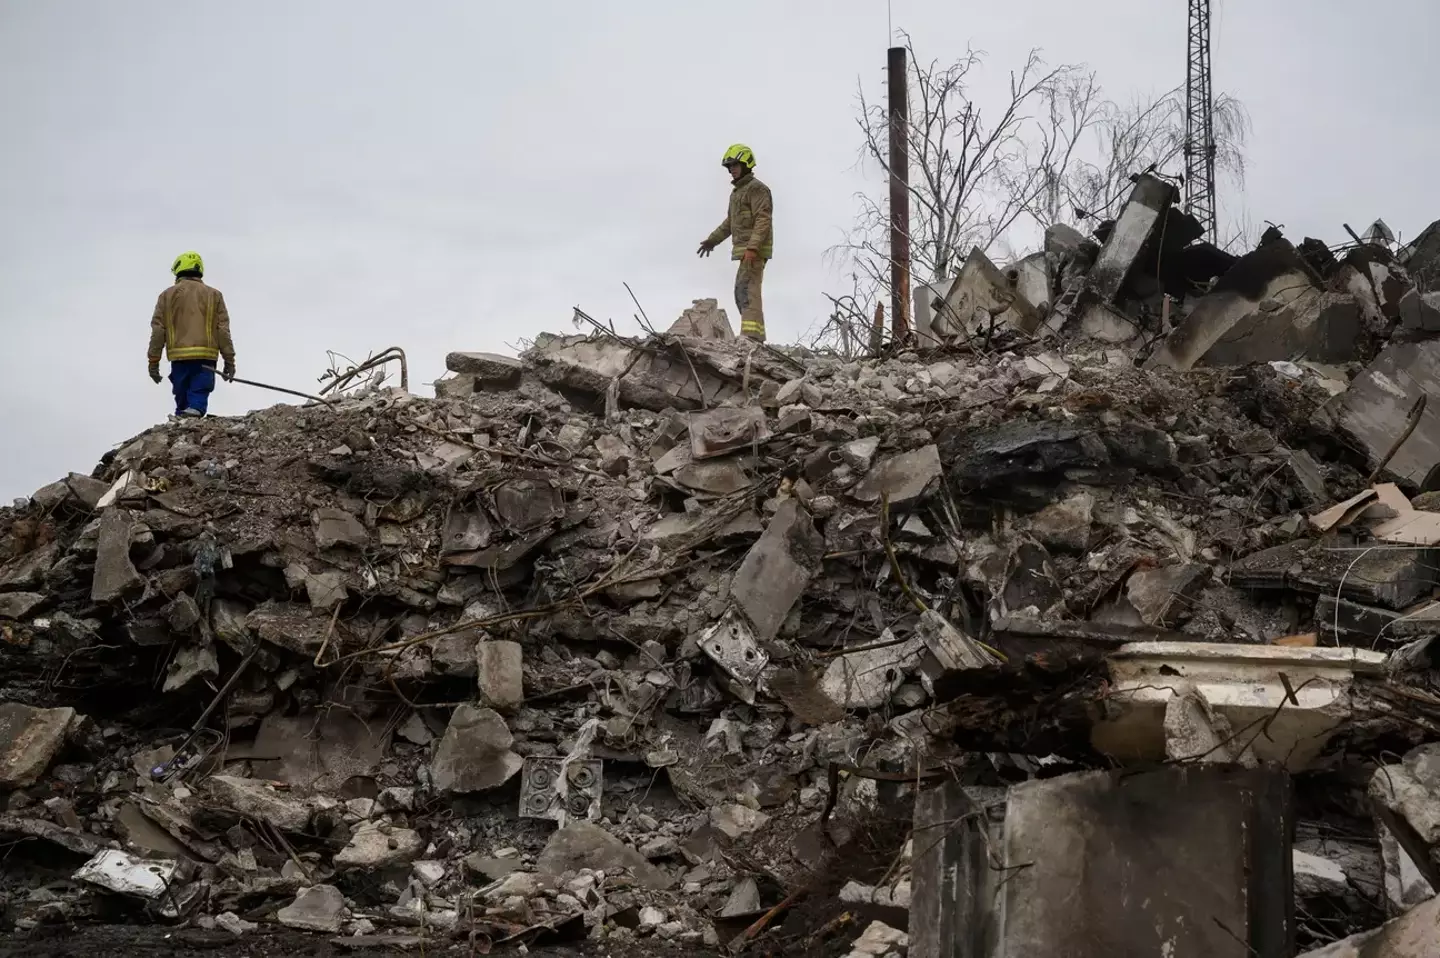 Workers on collapsed building in Ukraine.